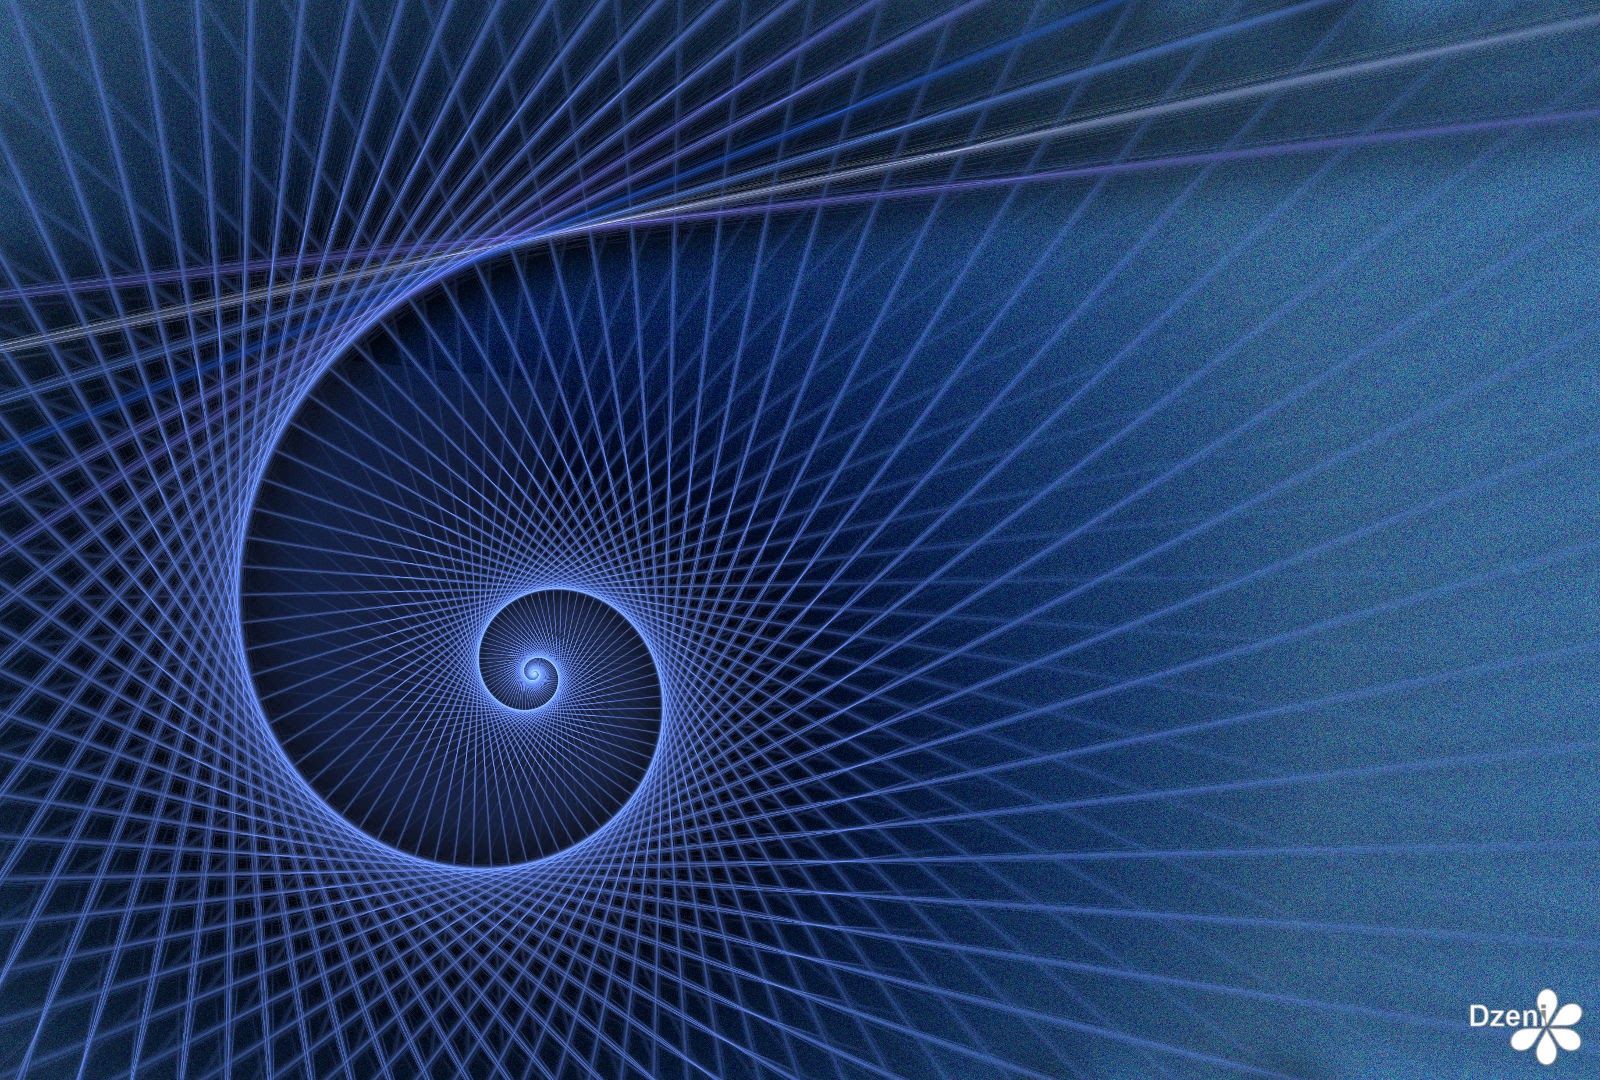 Read more about the article Spiral Perfection